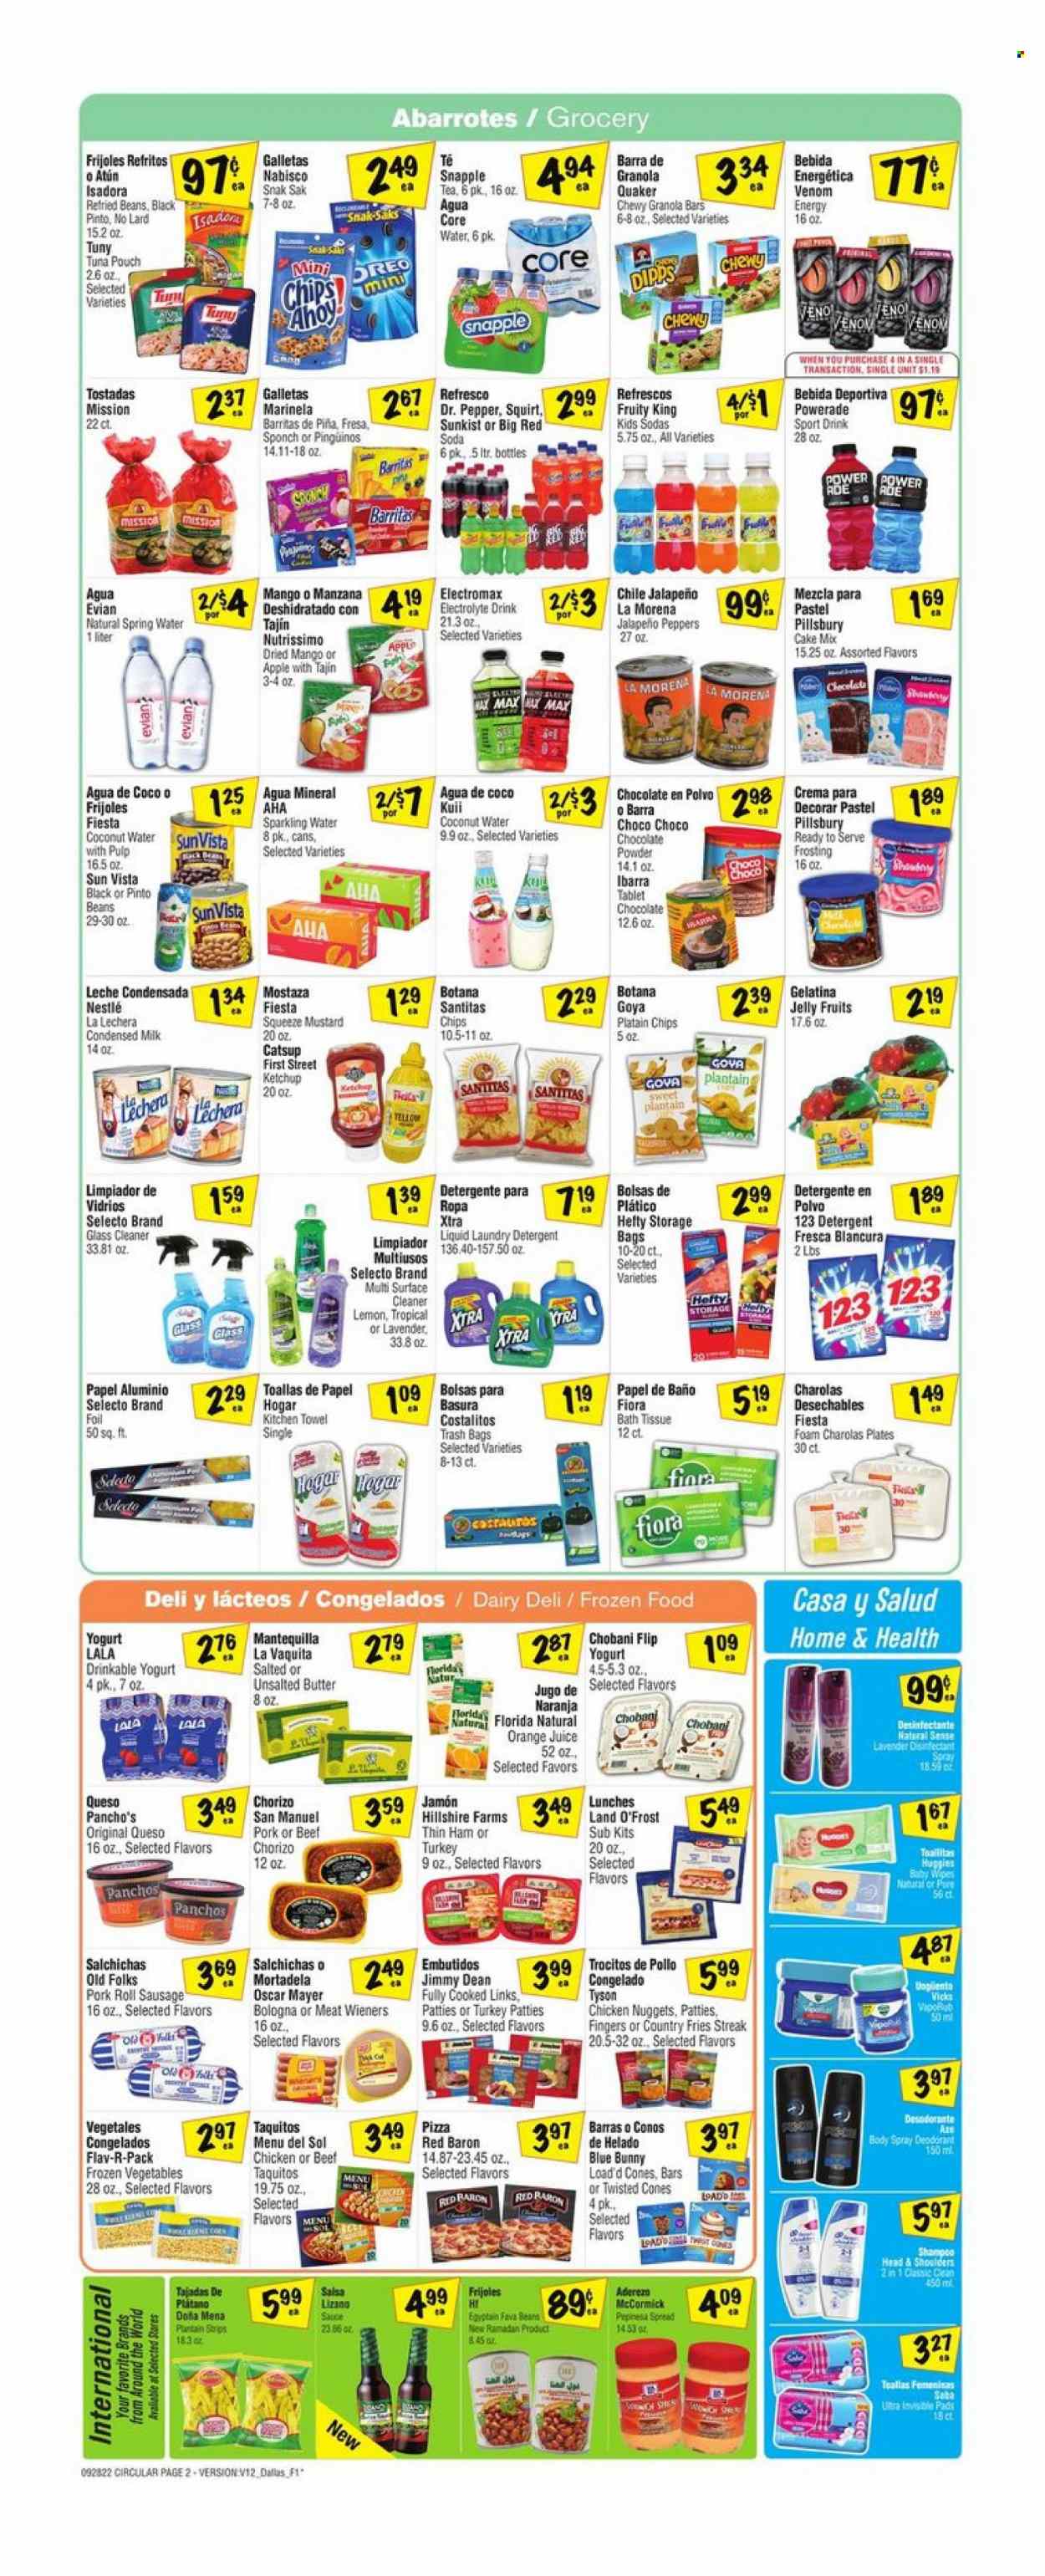 thumbnail - Fiesta Mart Flyer - 09/28/2022 - 10/04/2022 - Sales products - tostadas, cake mix, fava beans, jalapeño, mango, tuna, pizza, nuggets, sauce, Pillsbury, chicken nuggets, Quaker, Menu Del Sol, taquitos, Jimmy Dean, ham, chorizo, bologna sausage, Oscar Mayer, sausage, Oreo, yoghurt, Chobani, milk, condensed milk, lard, Blue Bunny, frozen vegetables, strips, potato fries, Red Baron, Nestlé, chocolate, jelly, Chips Ahoy!, frosting, refried beans, pinto beans, Goya, granola bar, mustard, ketchup, salsa, dried fruit, Powerade, orange juice, juice, Dr. Pepper, Snapple, spring water, soda, sparkling water, Evian, tea, wipes, baby wipes, bath tissue, kitchen towels, detergent, surface cleaner, cleaner, desinfection, glass cleaner, laundry detergent, XTRA, shampoo, Head & Shoulders, body spray, anti-perspirant, deodorant, antibacterial spray, Vicks, Hefty, trash bags, storage bag. Page 2.